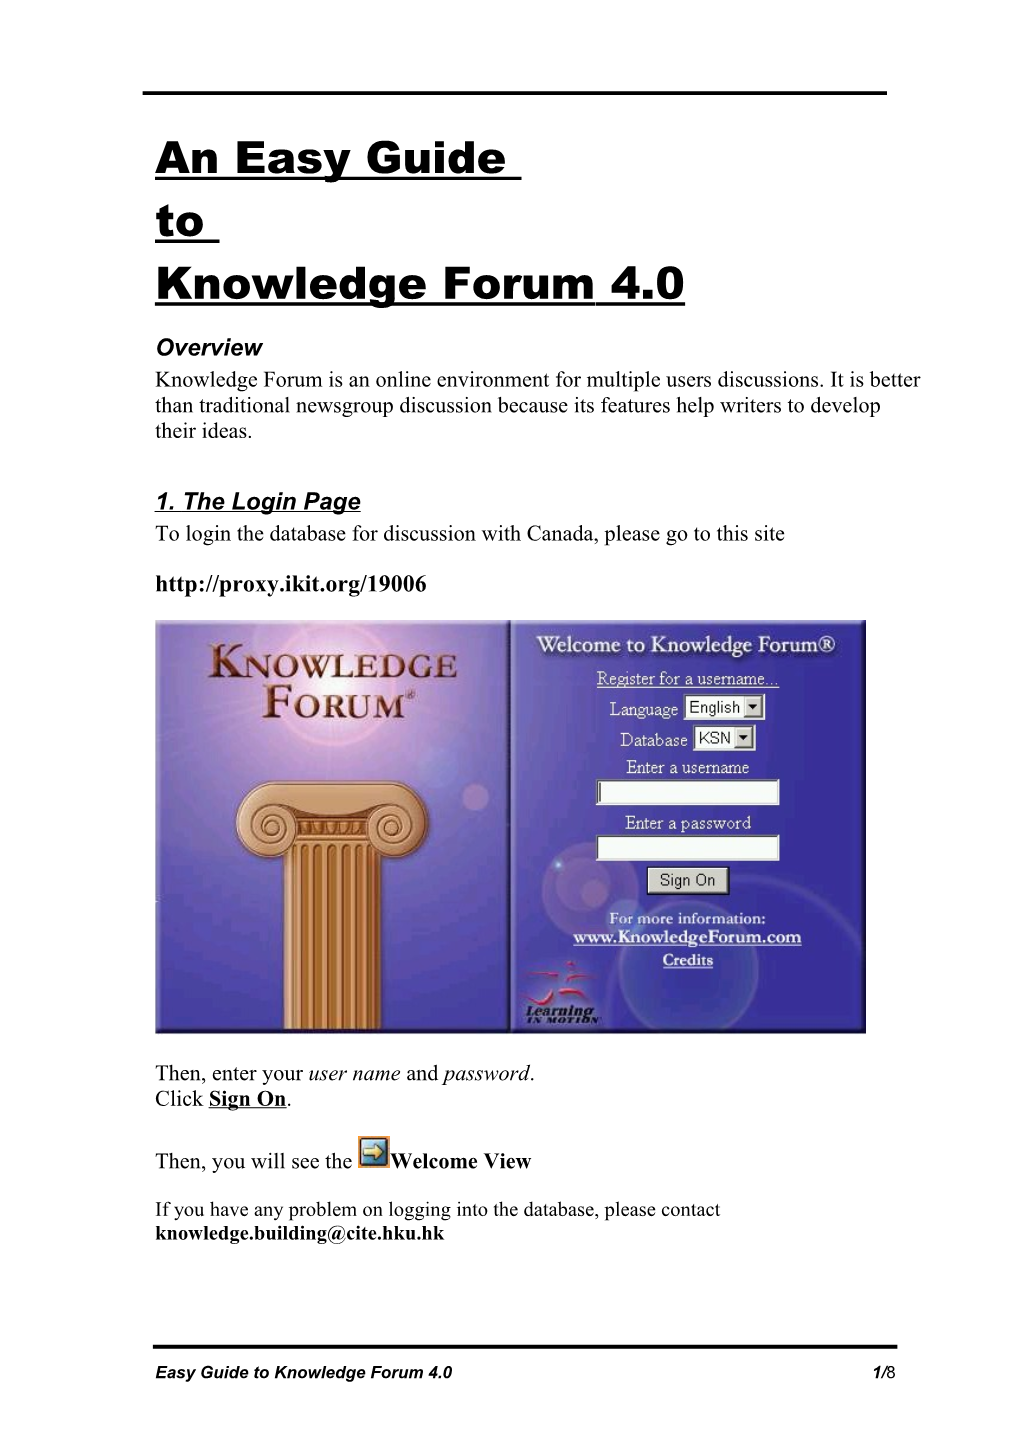 An Easy Guide to Knowledge Forum